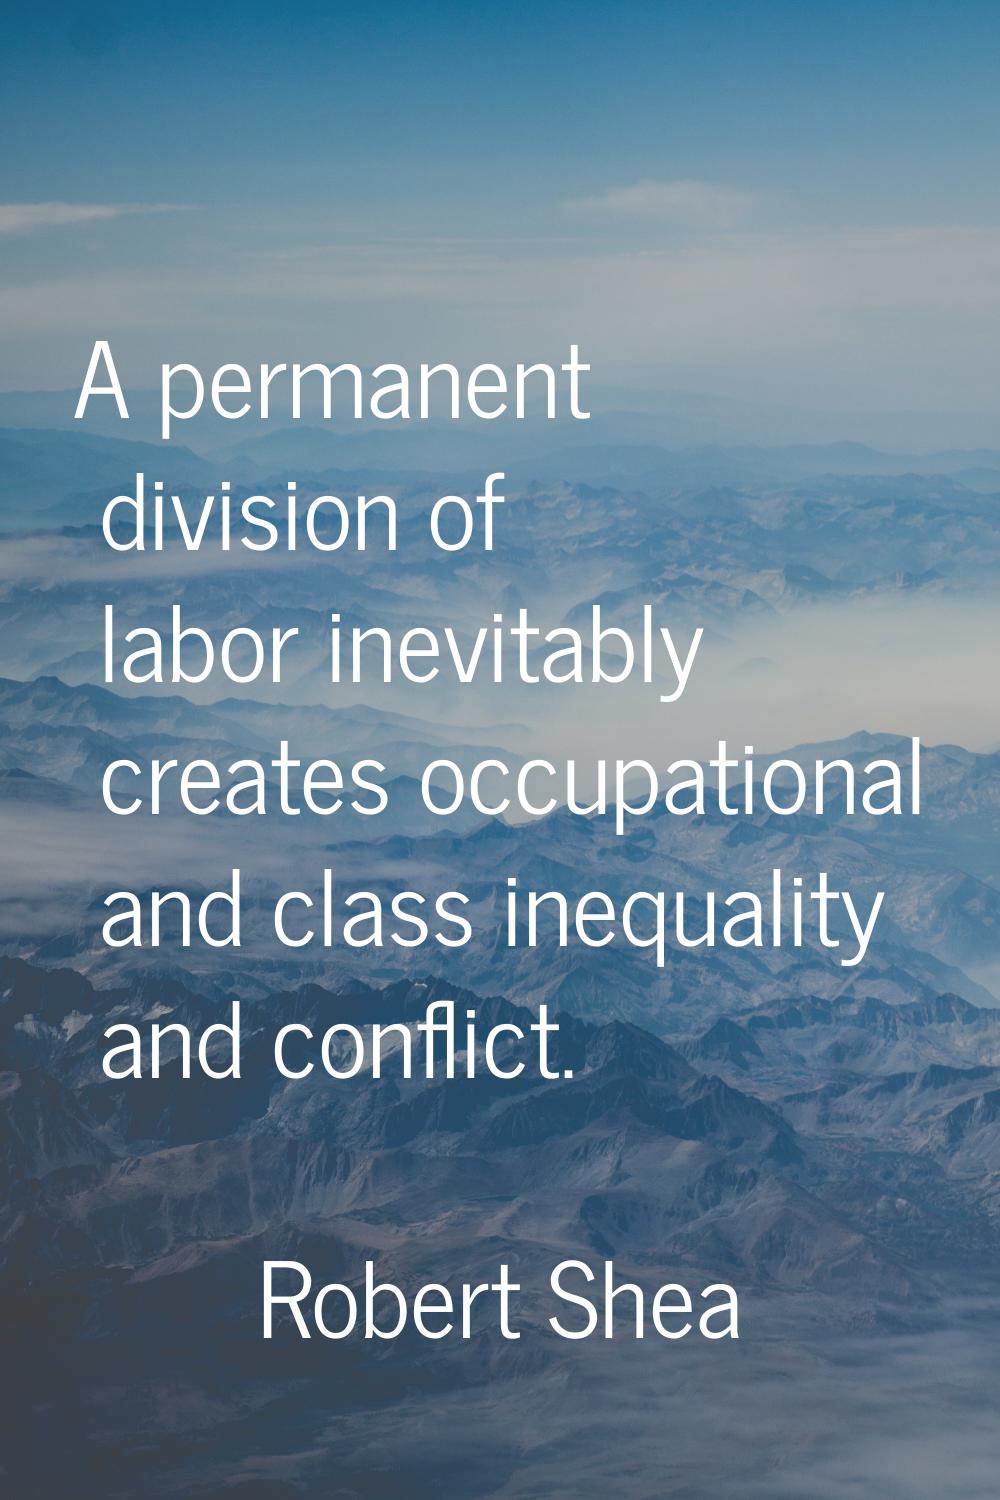 A permanent division of labor inevitably creates occupational and class inequality and conflict.